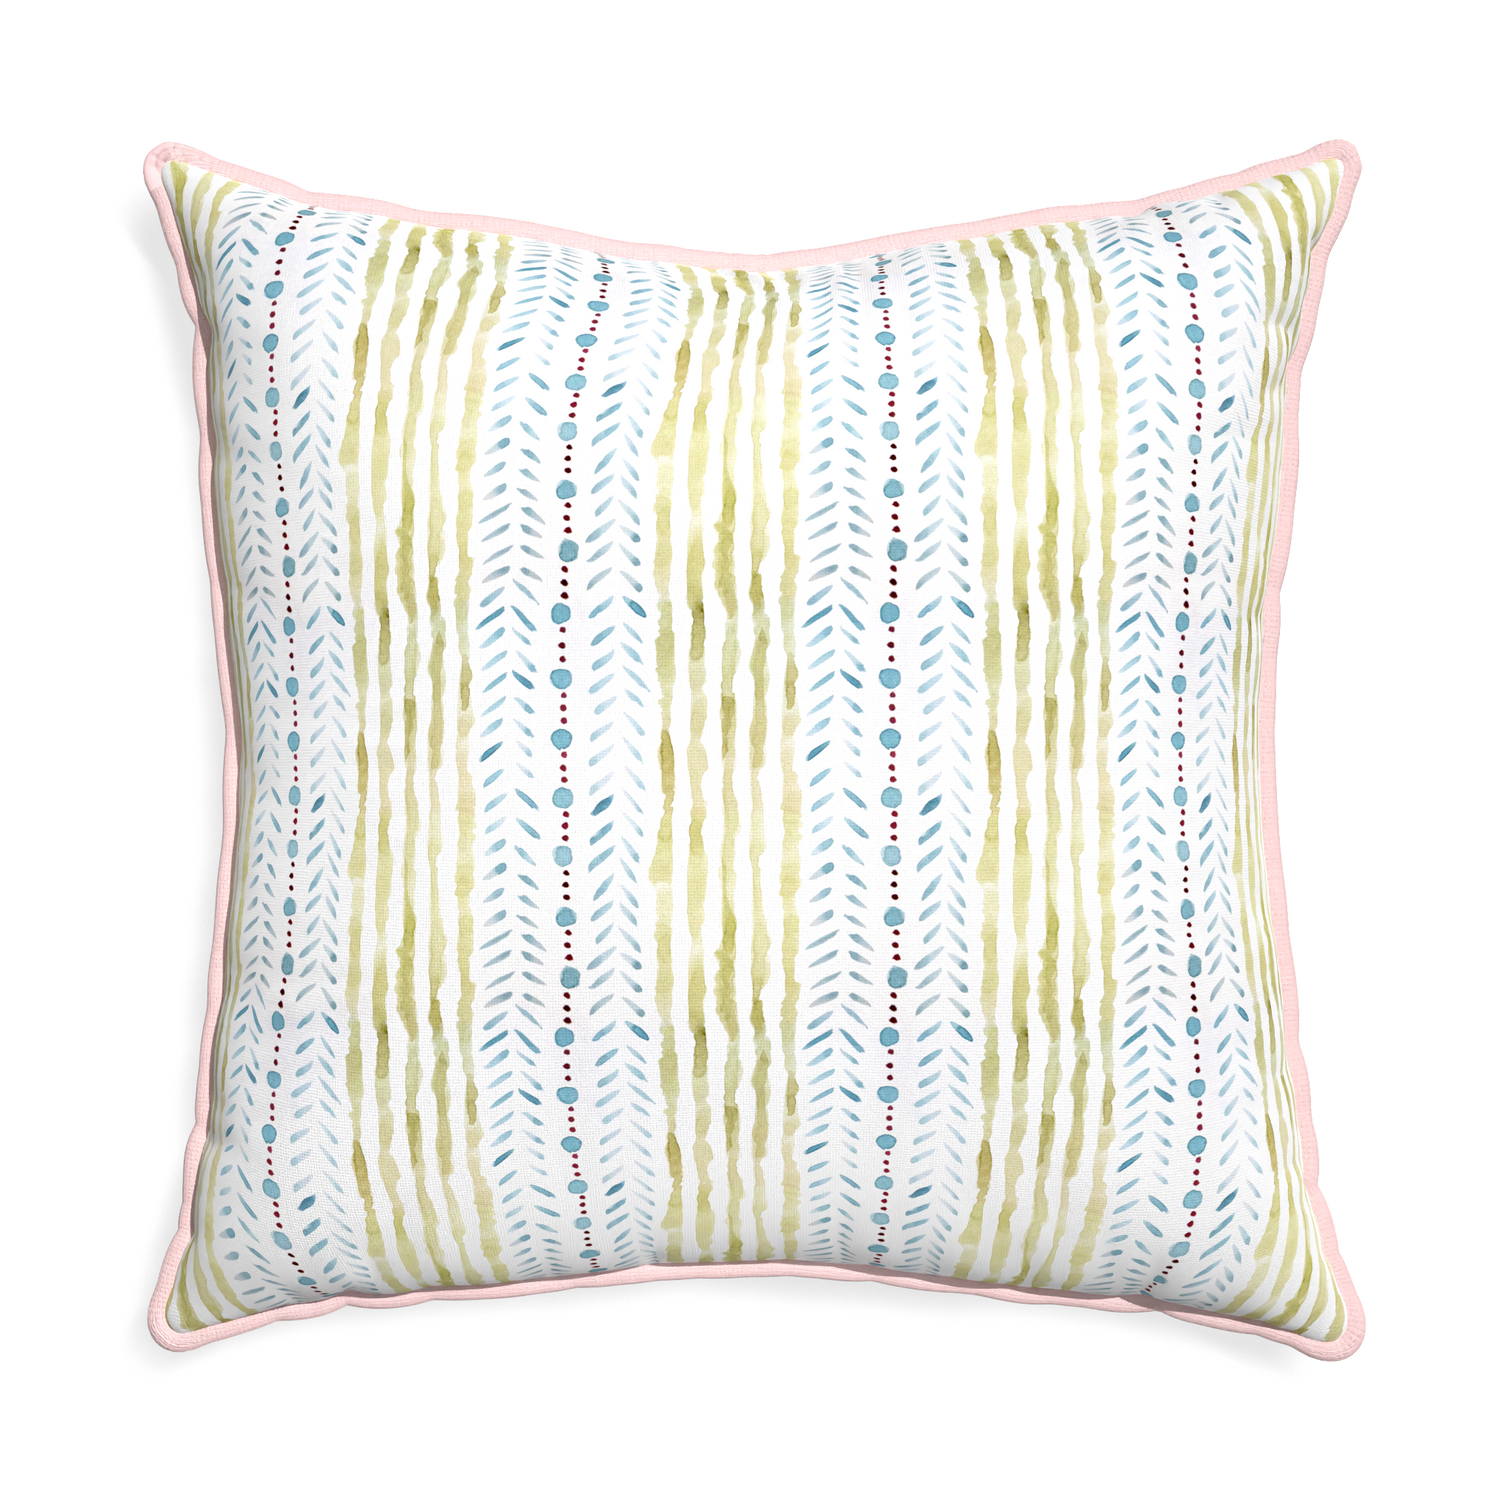 Euro-sham julia custom blue & green stripedpillow with petal piping on white background